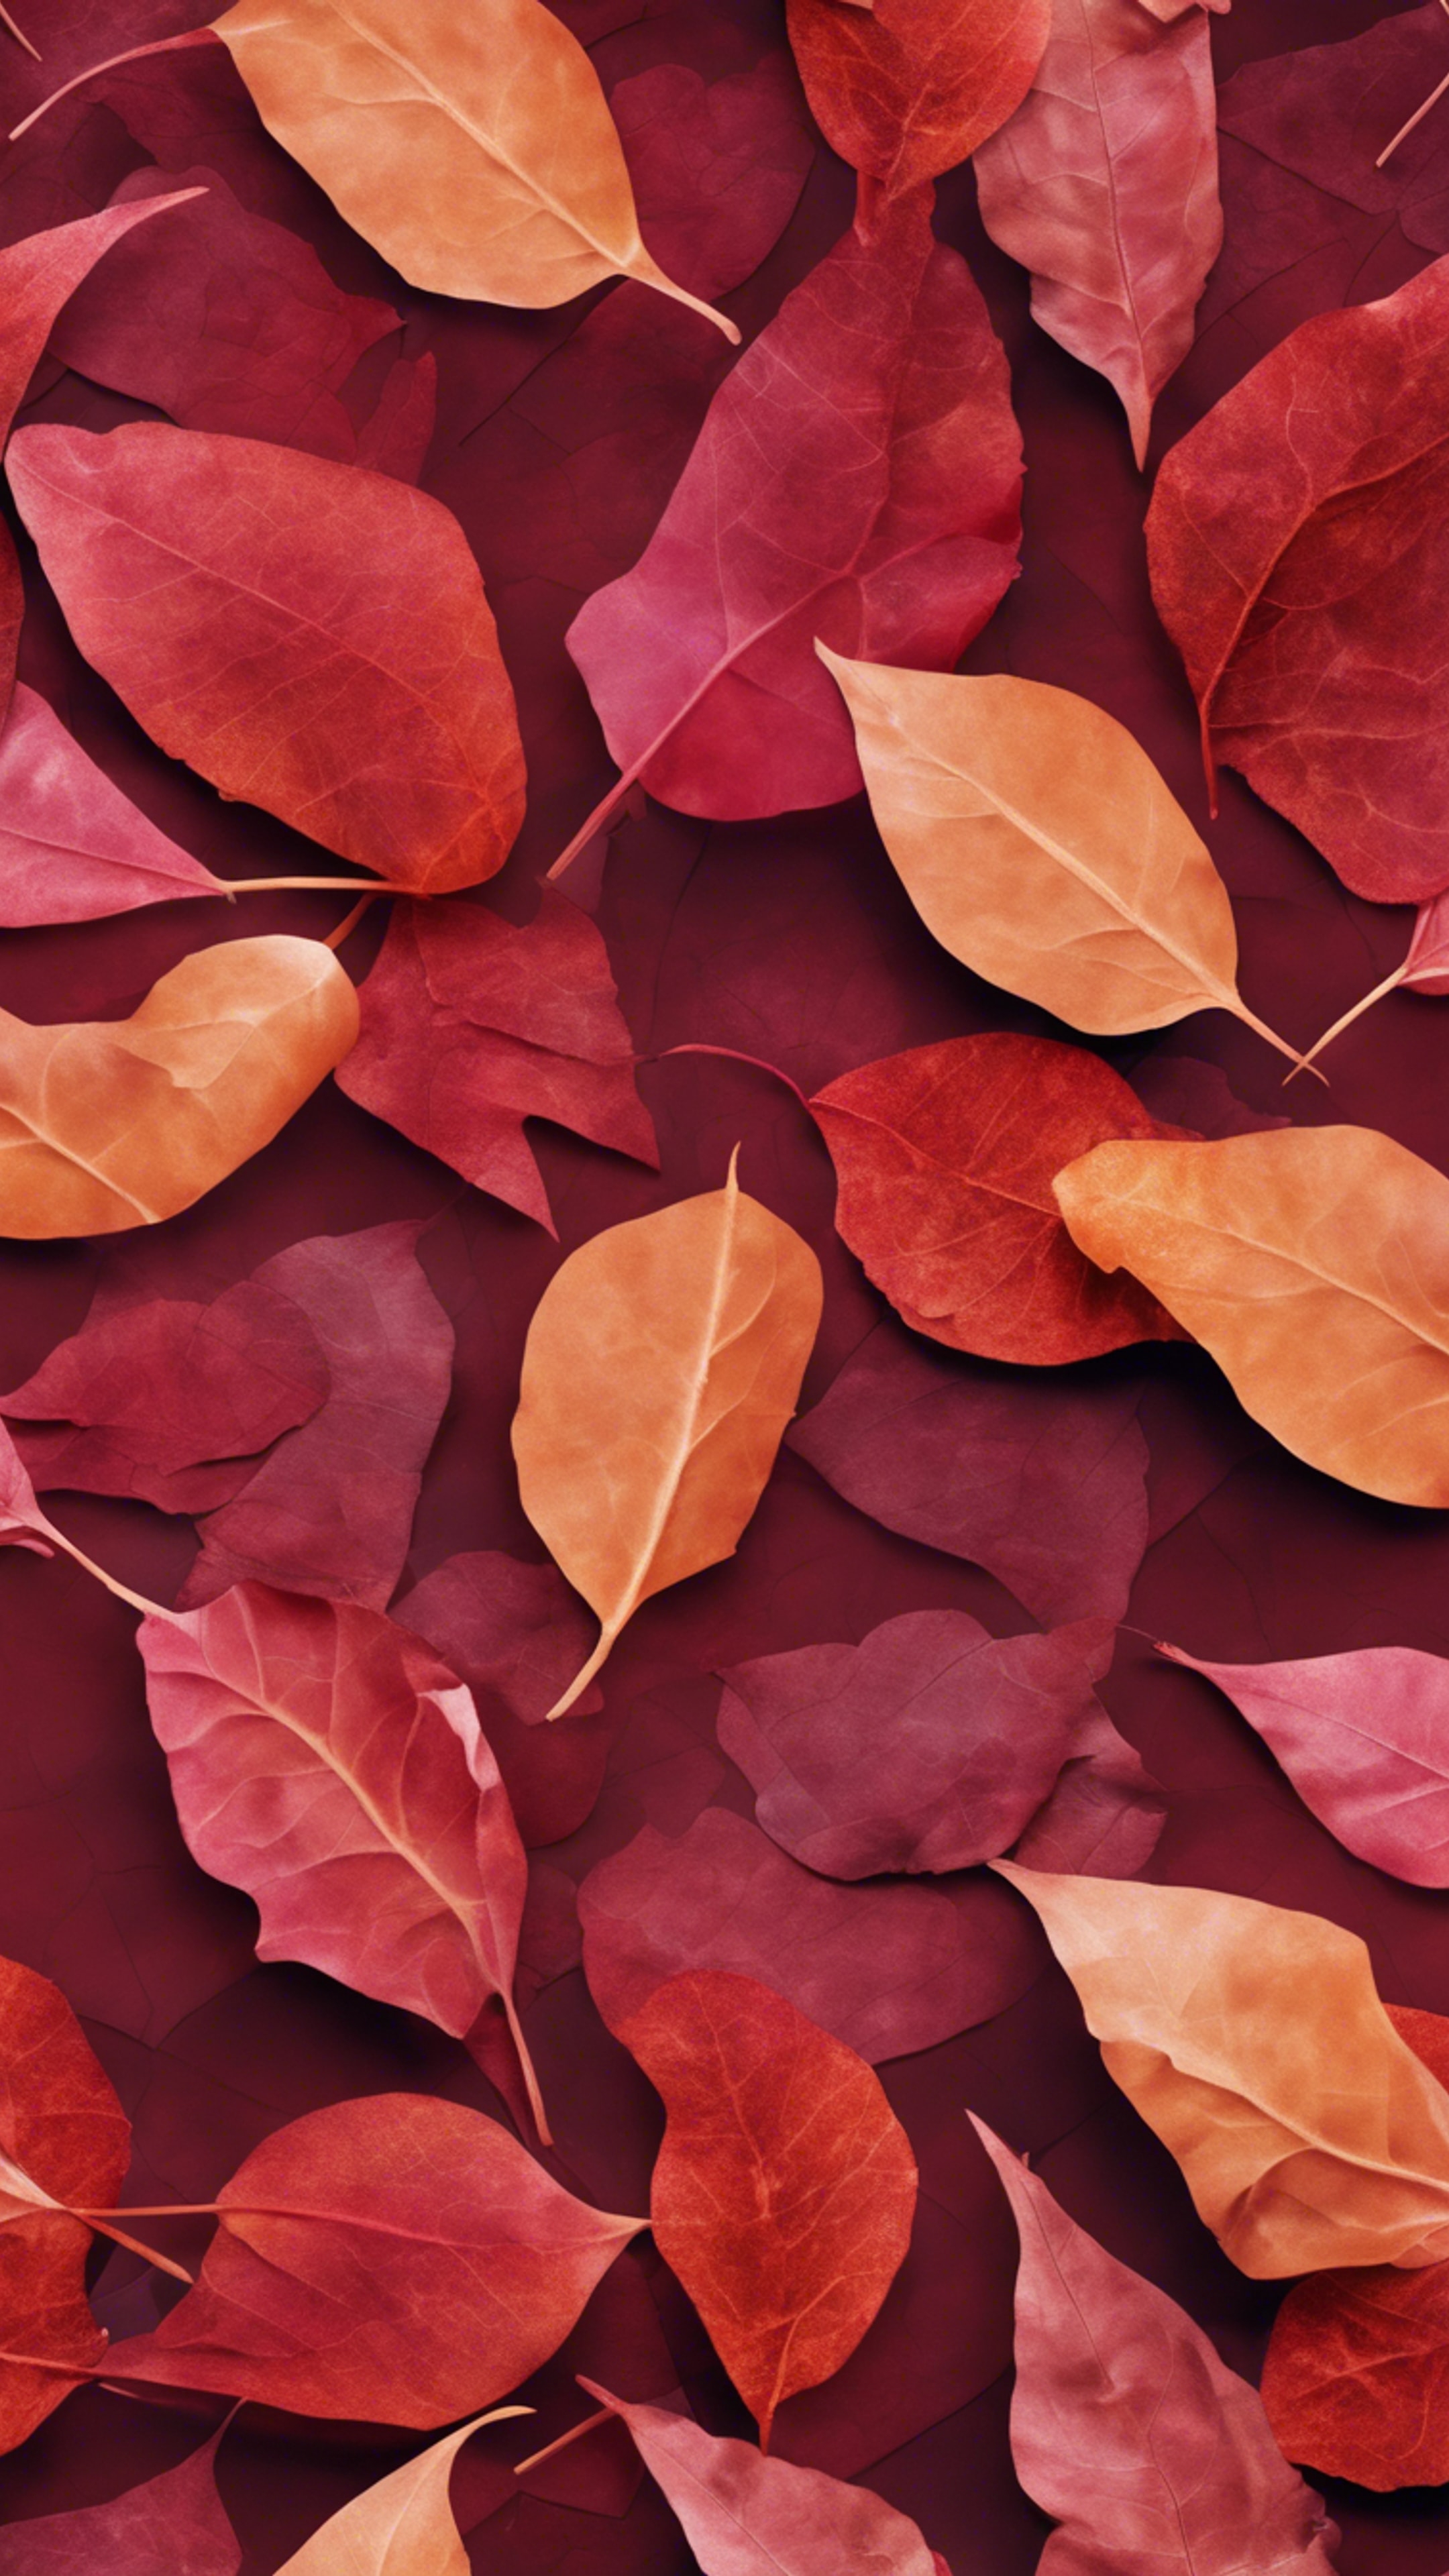 An abstract, tessellating pattern of fiery ruby and russet shapes, reminiscent of falling leaves in autumn. Fondo de pantalla[1bca3c6cf9b9400393d6]